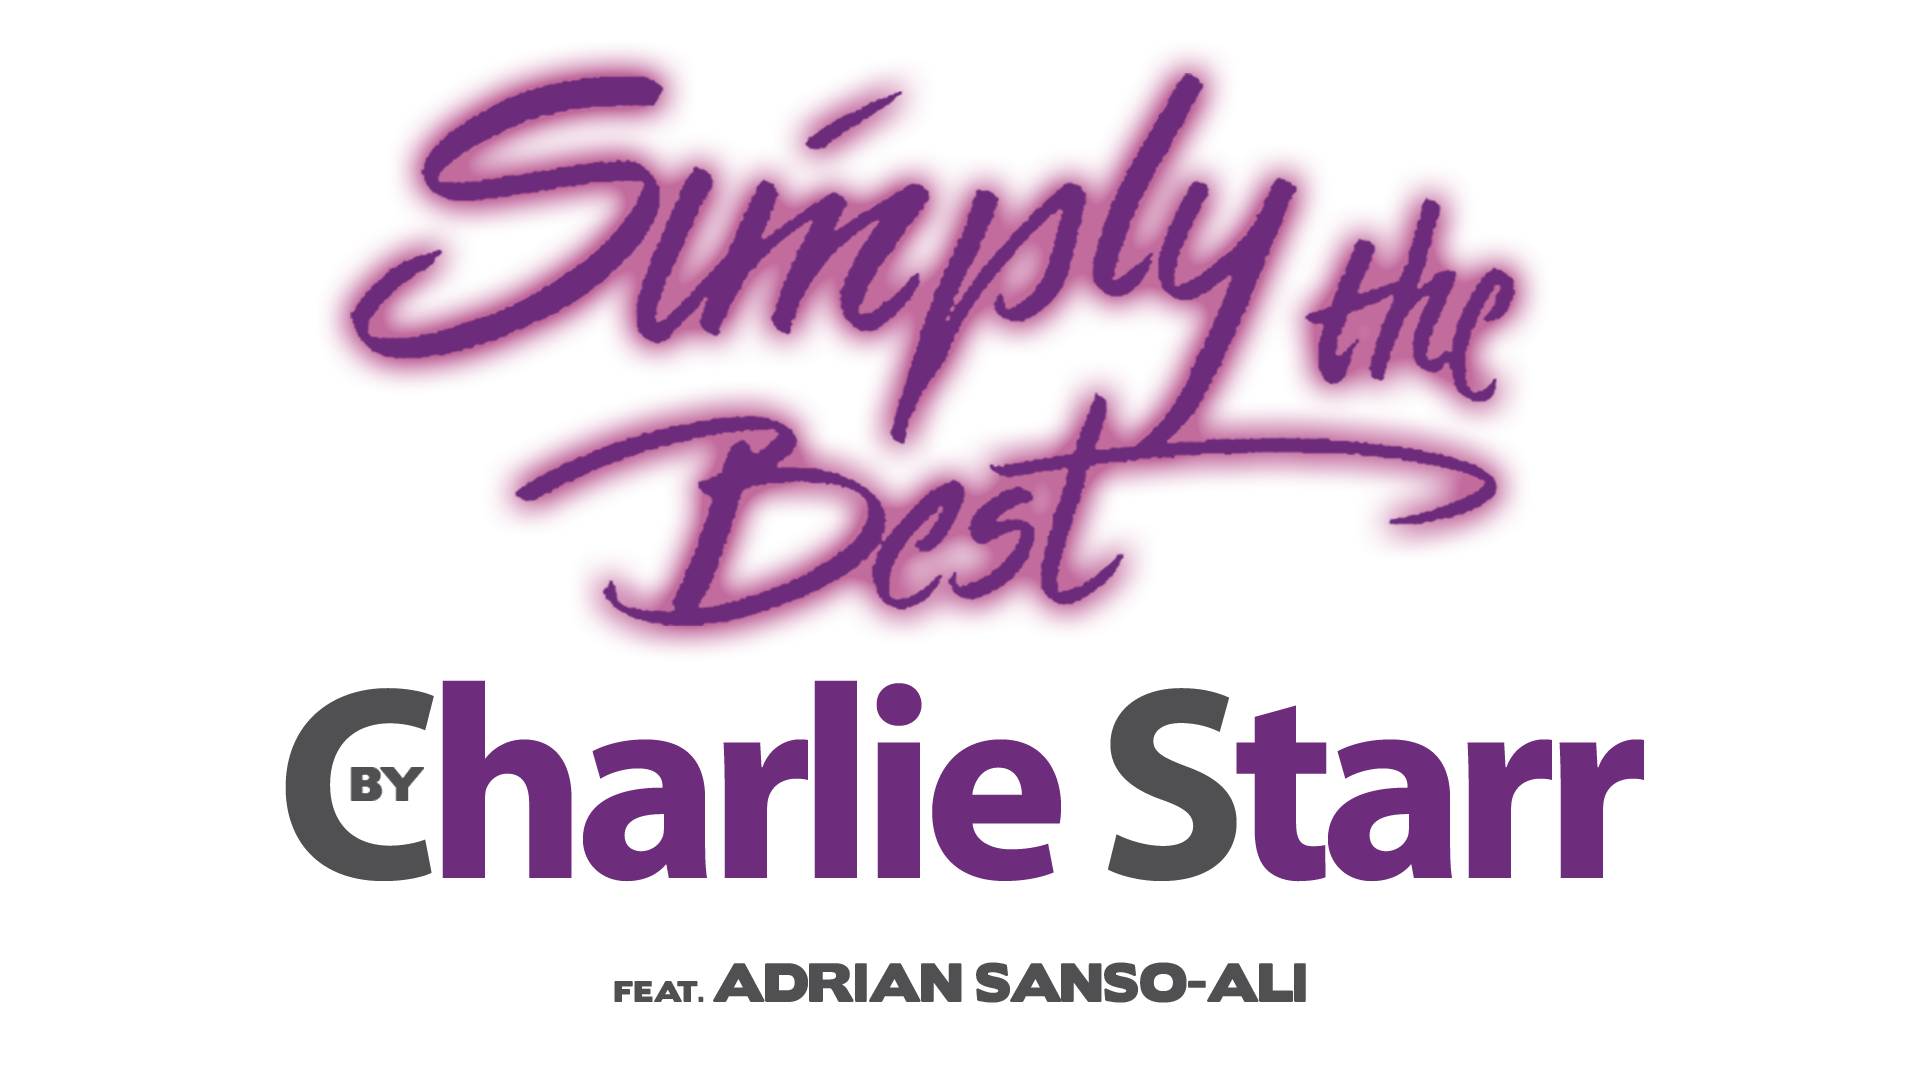 Simply the Best by Charlie Starr